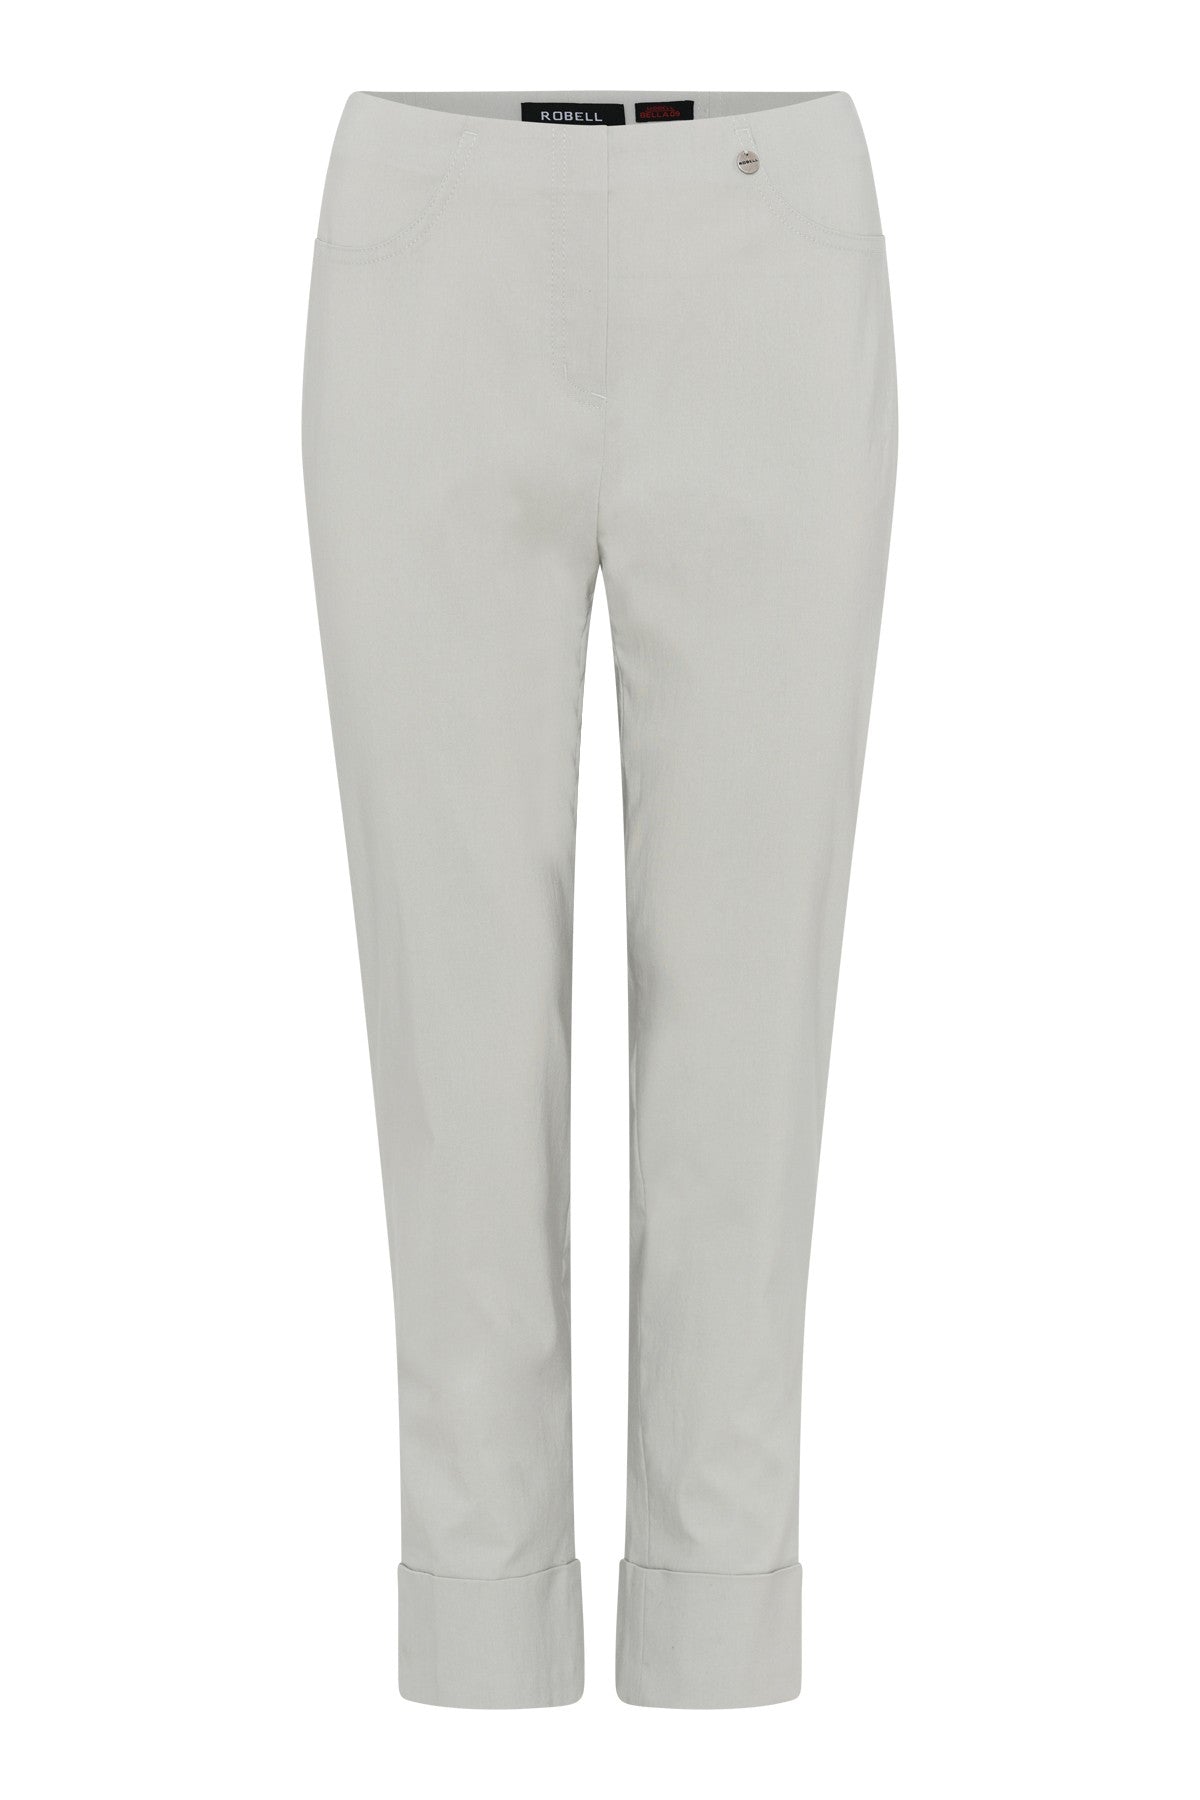 Robell Bella Taupe Trousers